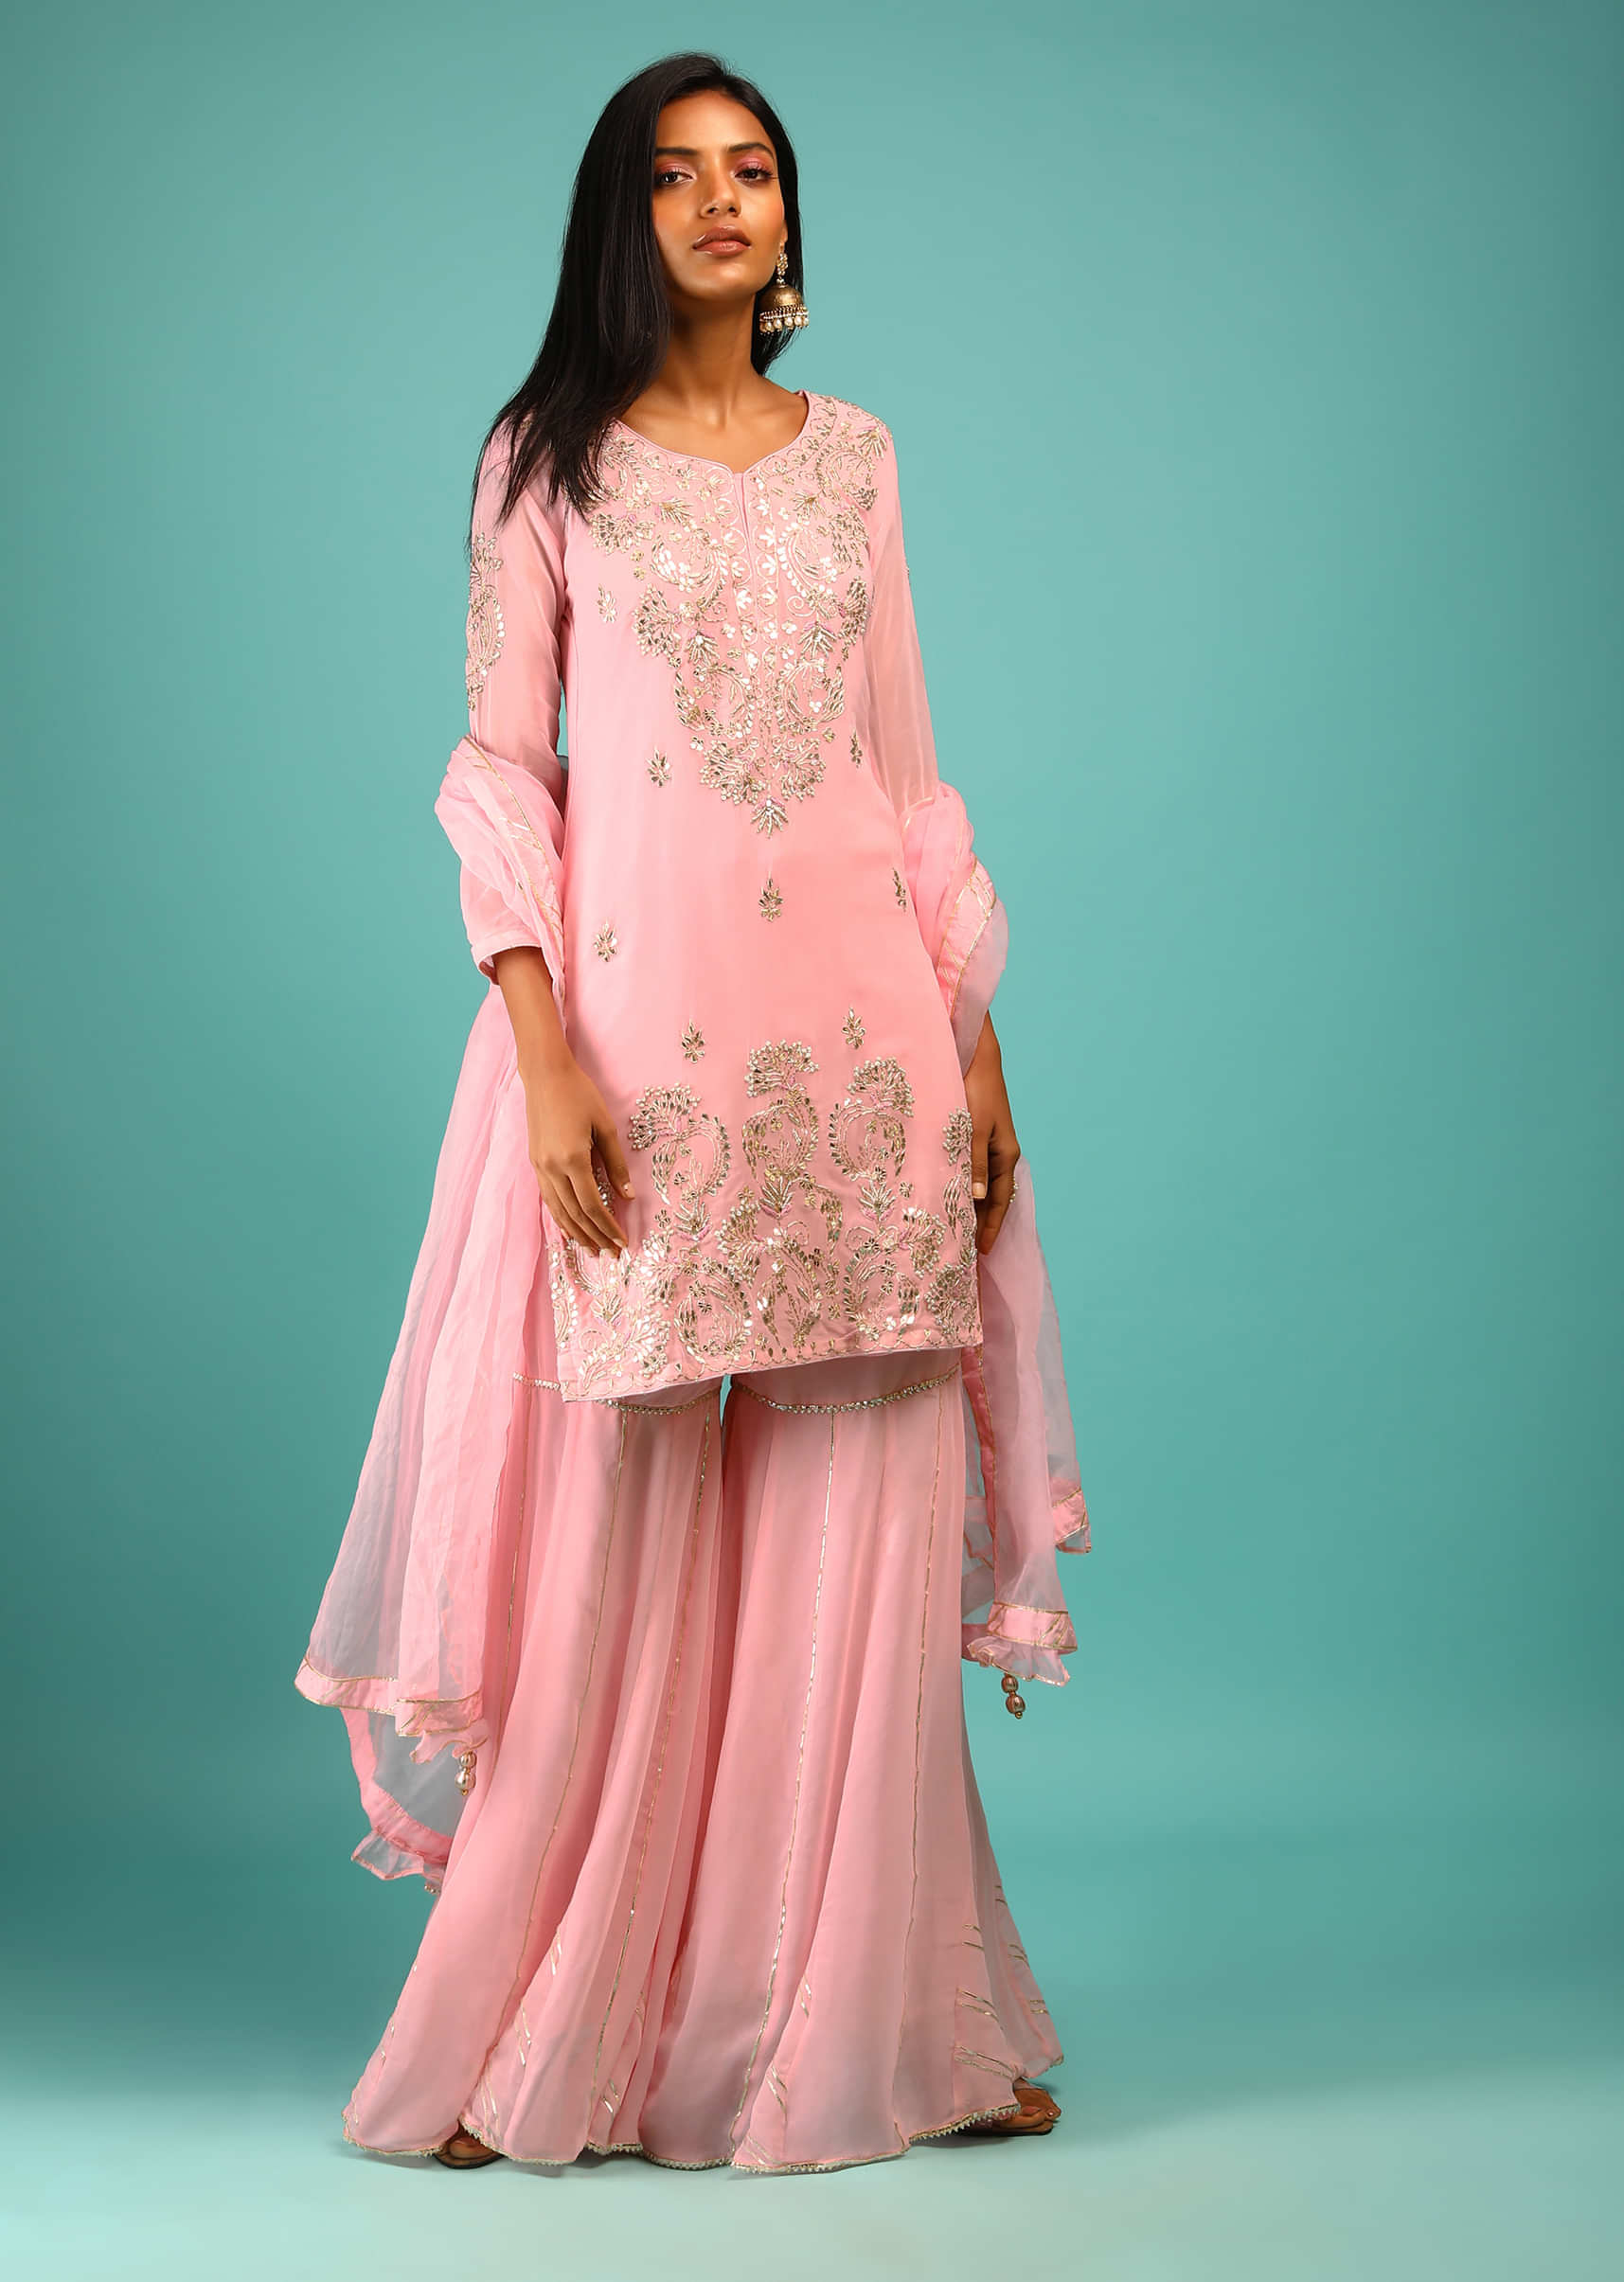 Rose Pink Sharara Suit In Georgette With Three Quarter Sleeves And Gotta Patti Embroidery